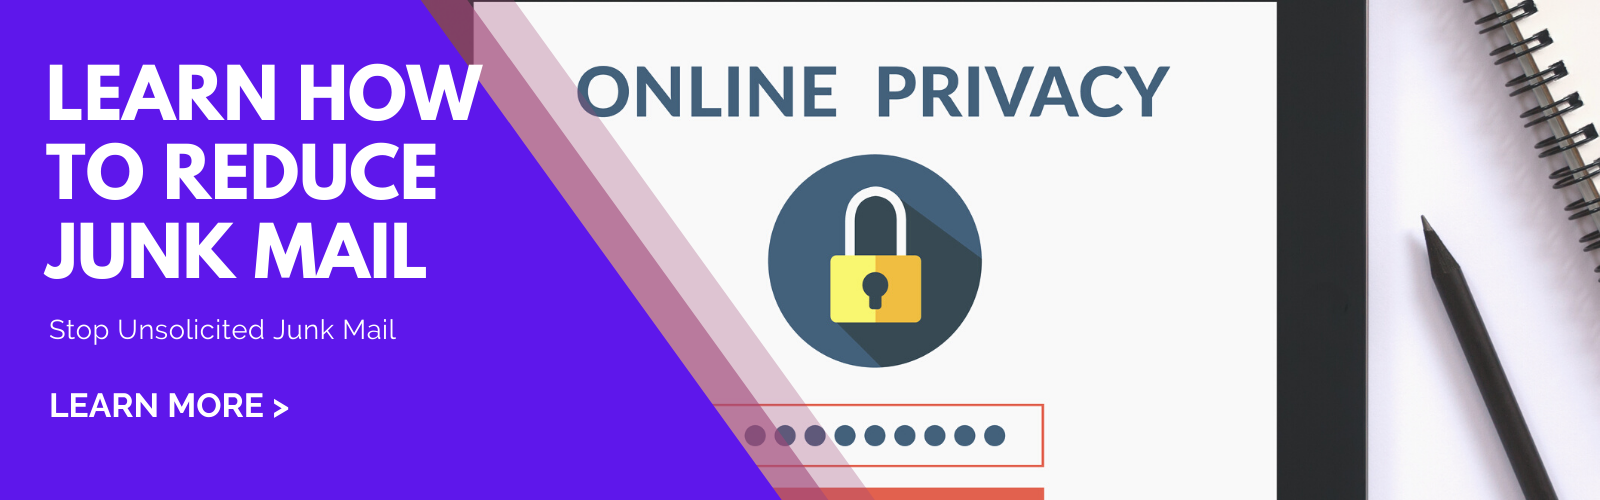 online privacy opt out